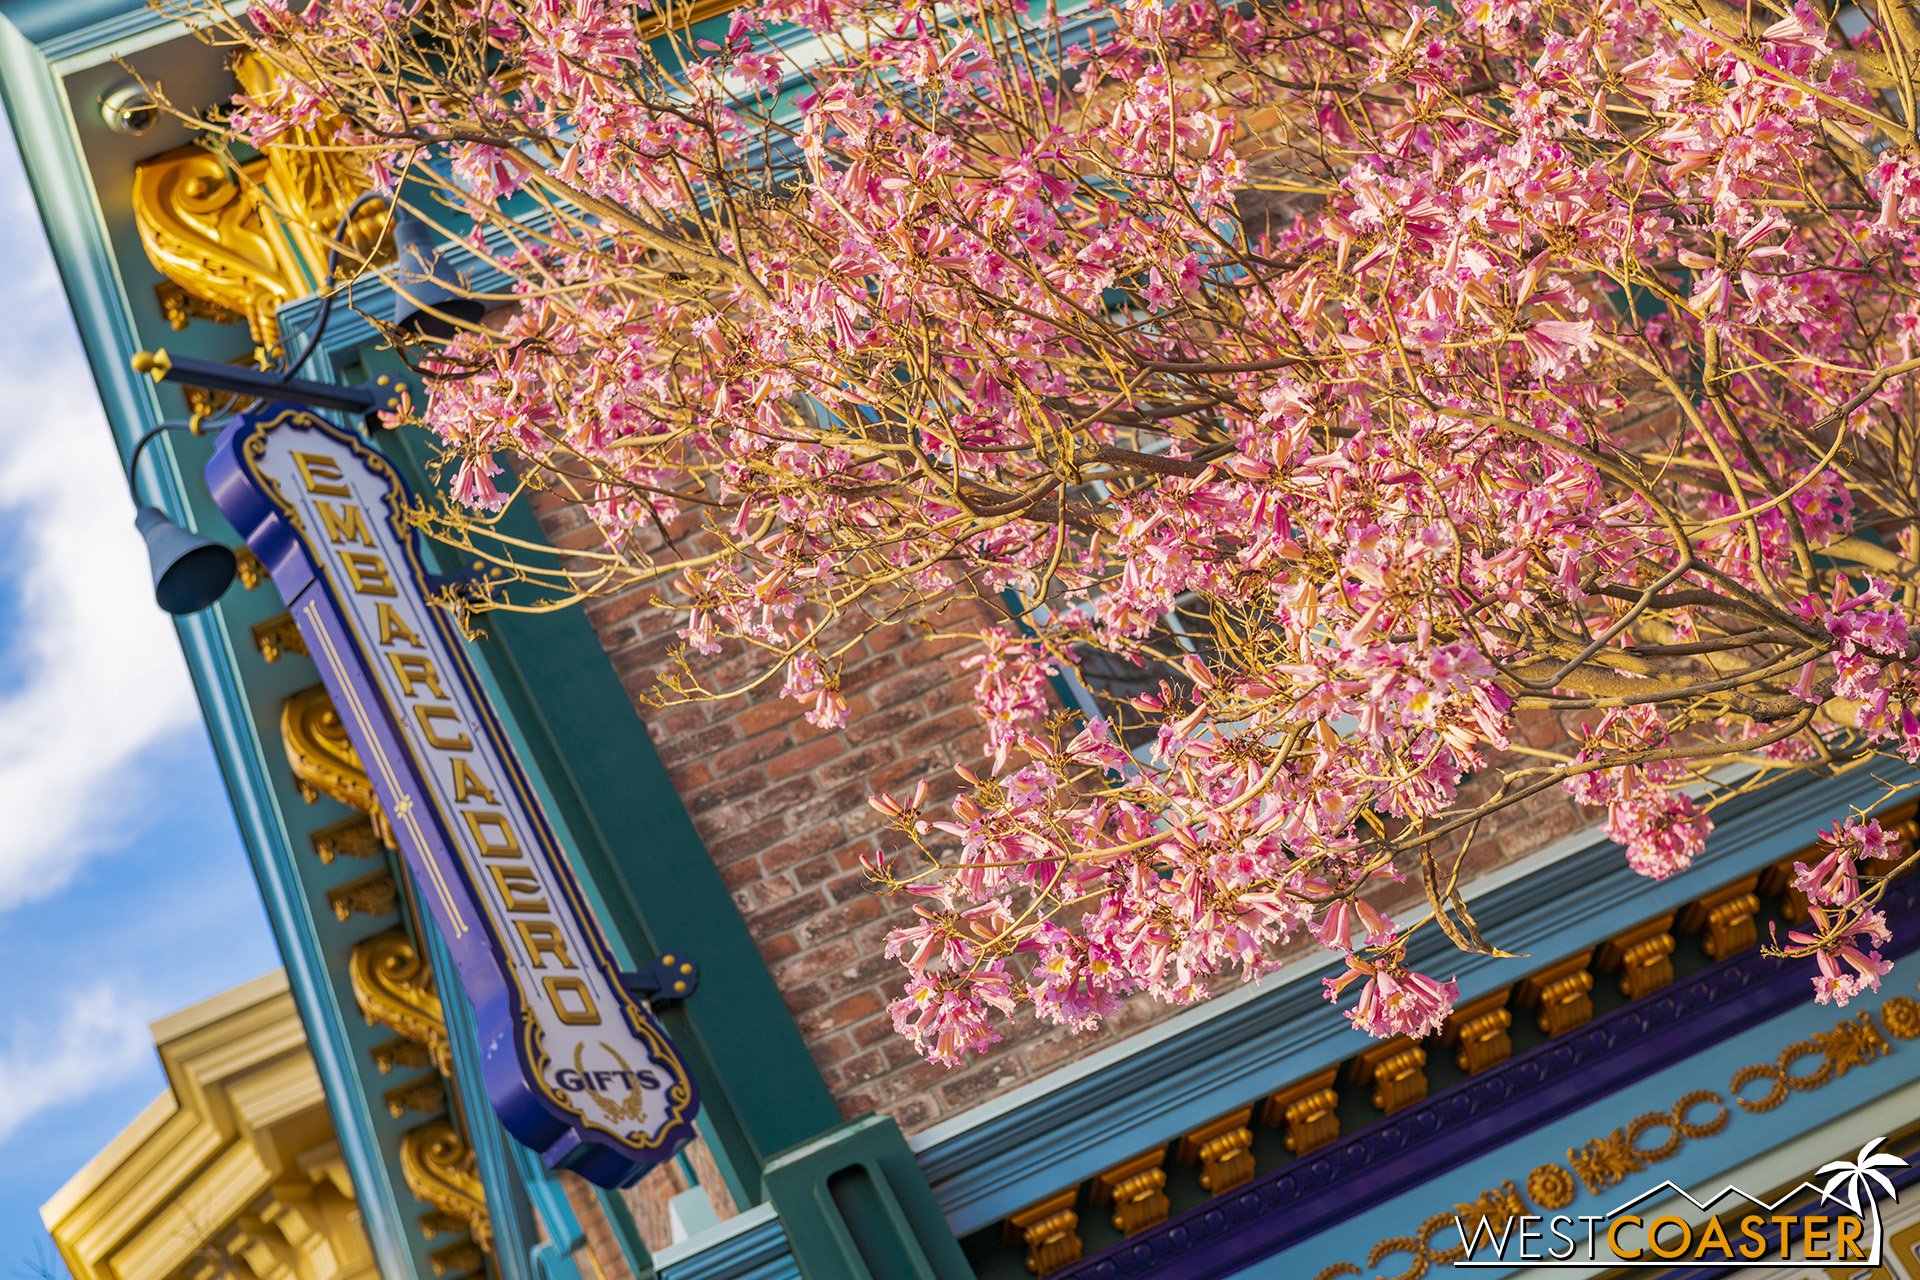  The Trumpet Tree over by the old Embarcadero Store in Pacific Wharf has been blooming too. 